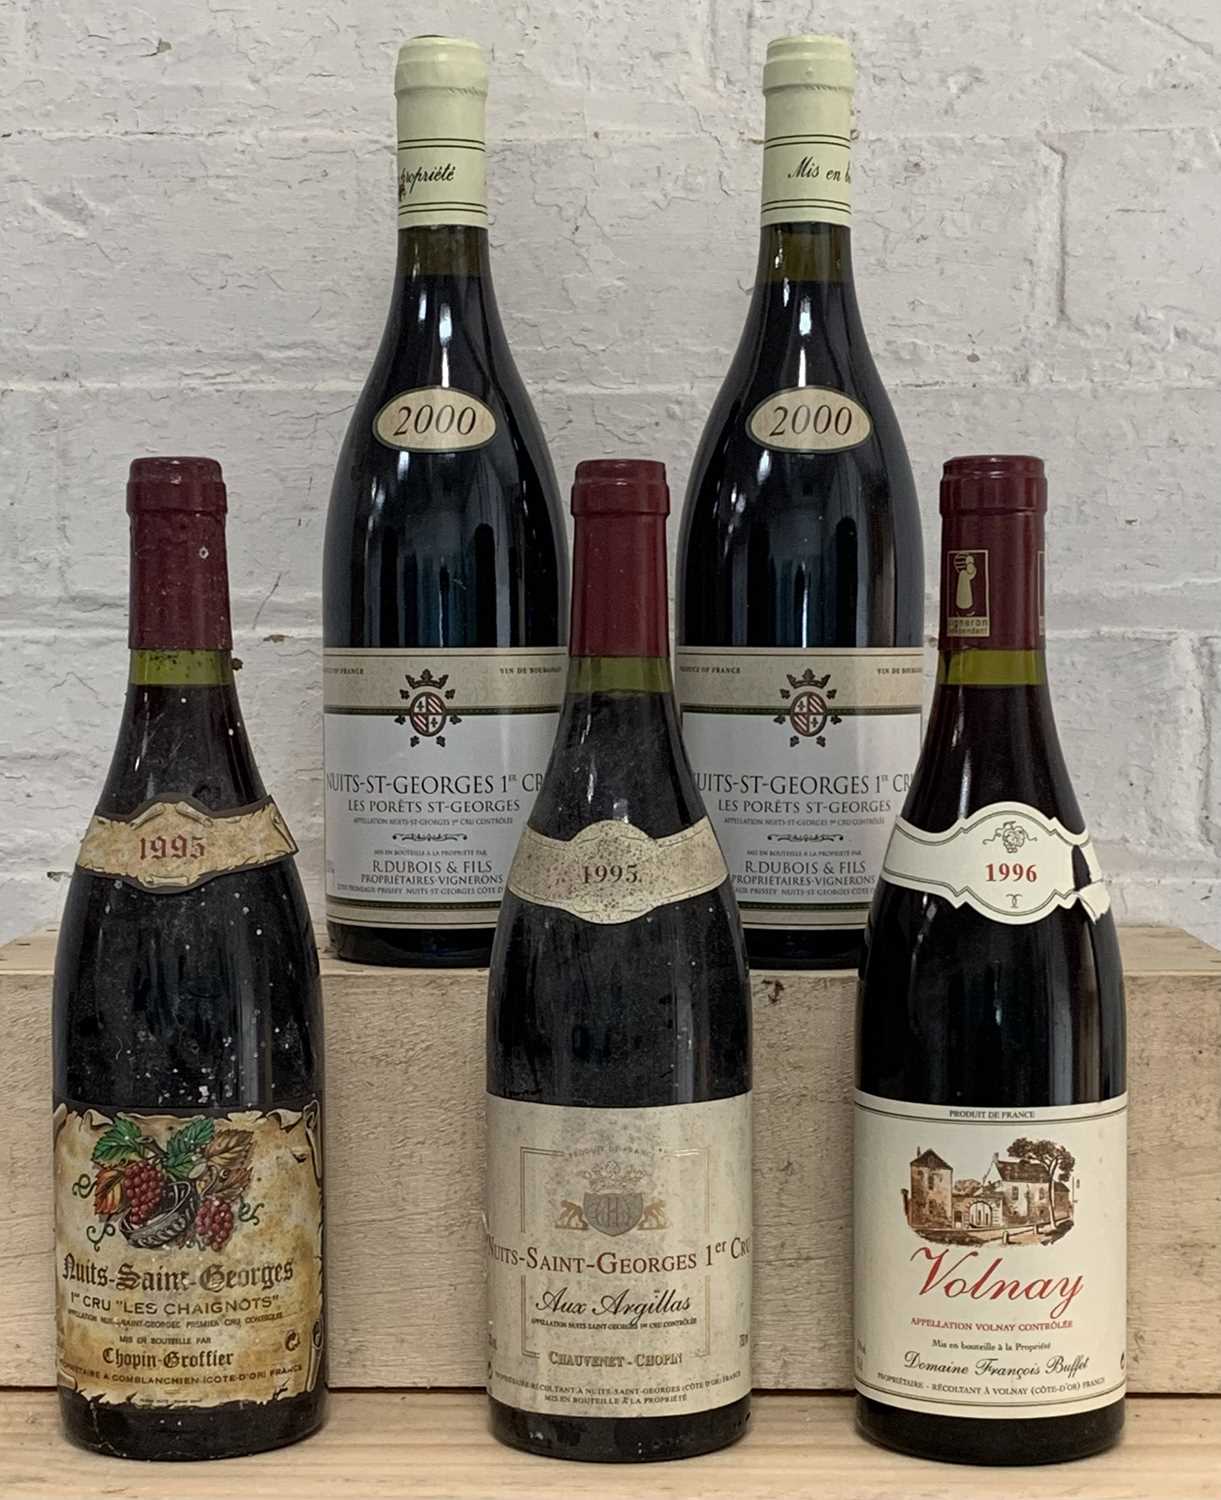 Lot 26 - 5 Bottles Mixed Lot of Nuits St Georges 1er Cru and Volnay